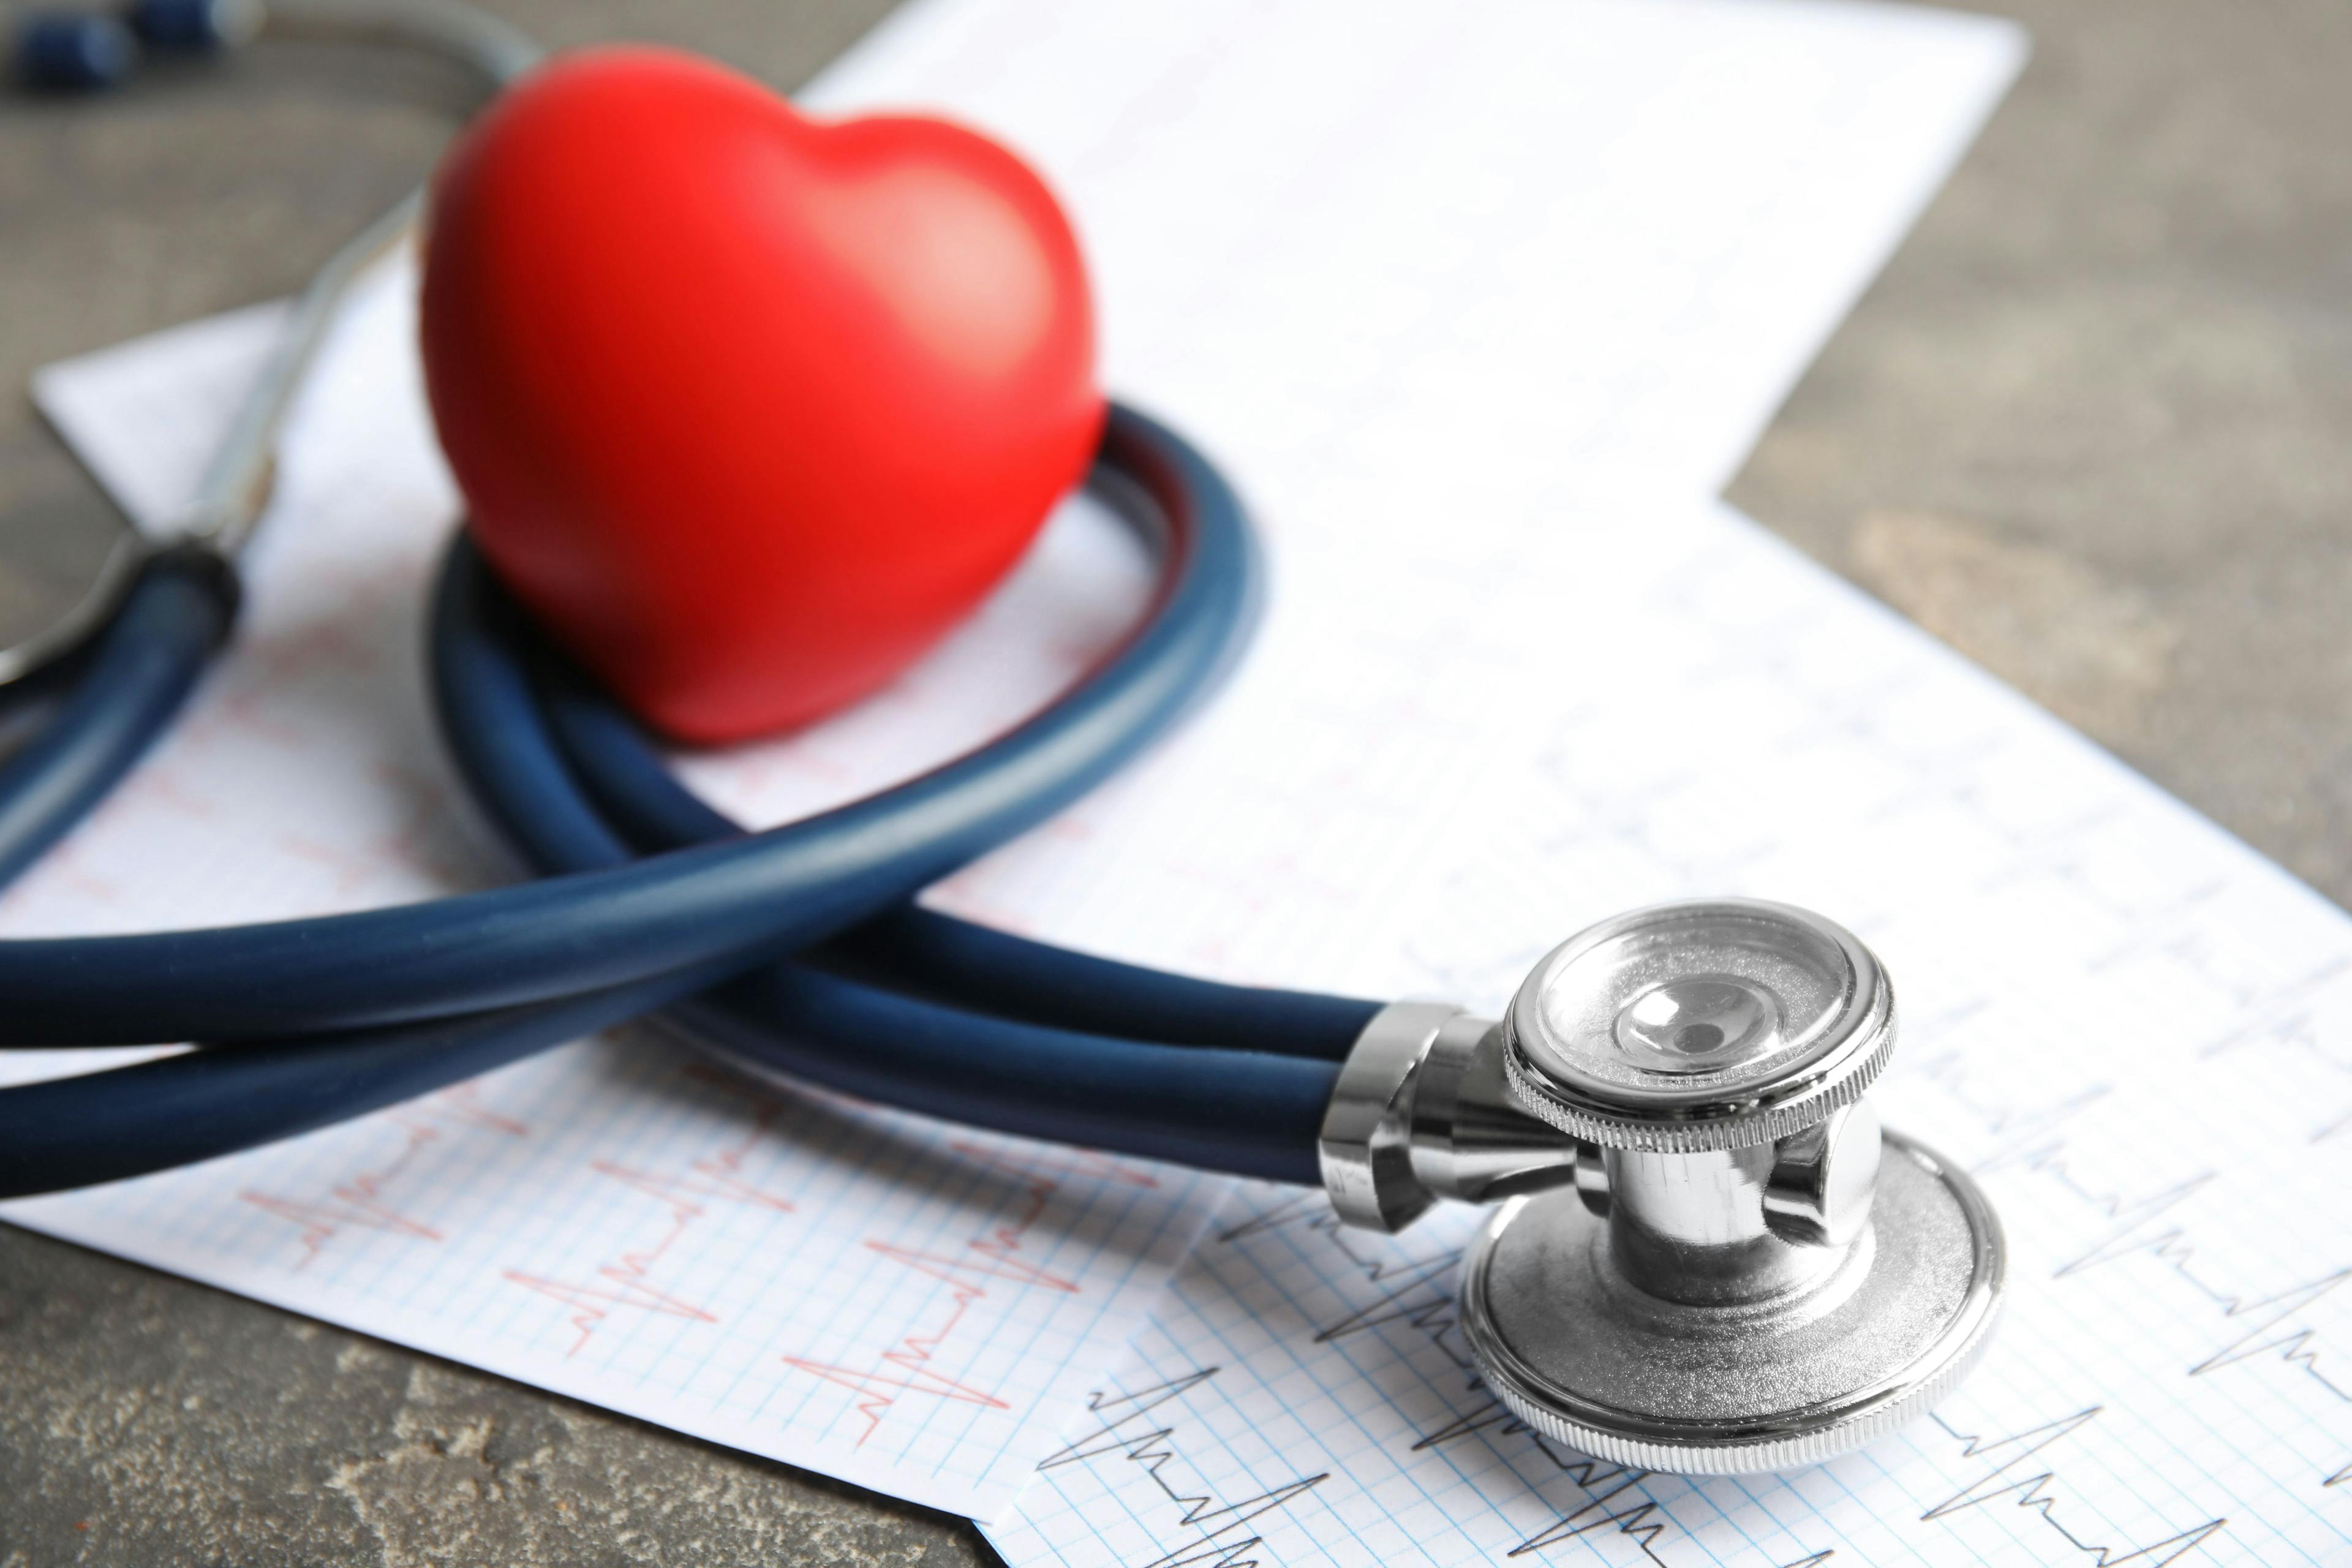 Stethoscope, red heart and cardiogram on gray table | Image Credit: New Africa - stock.adobe.com